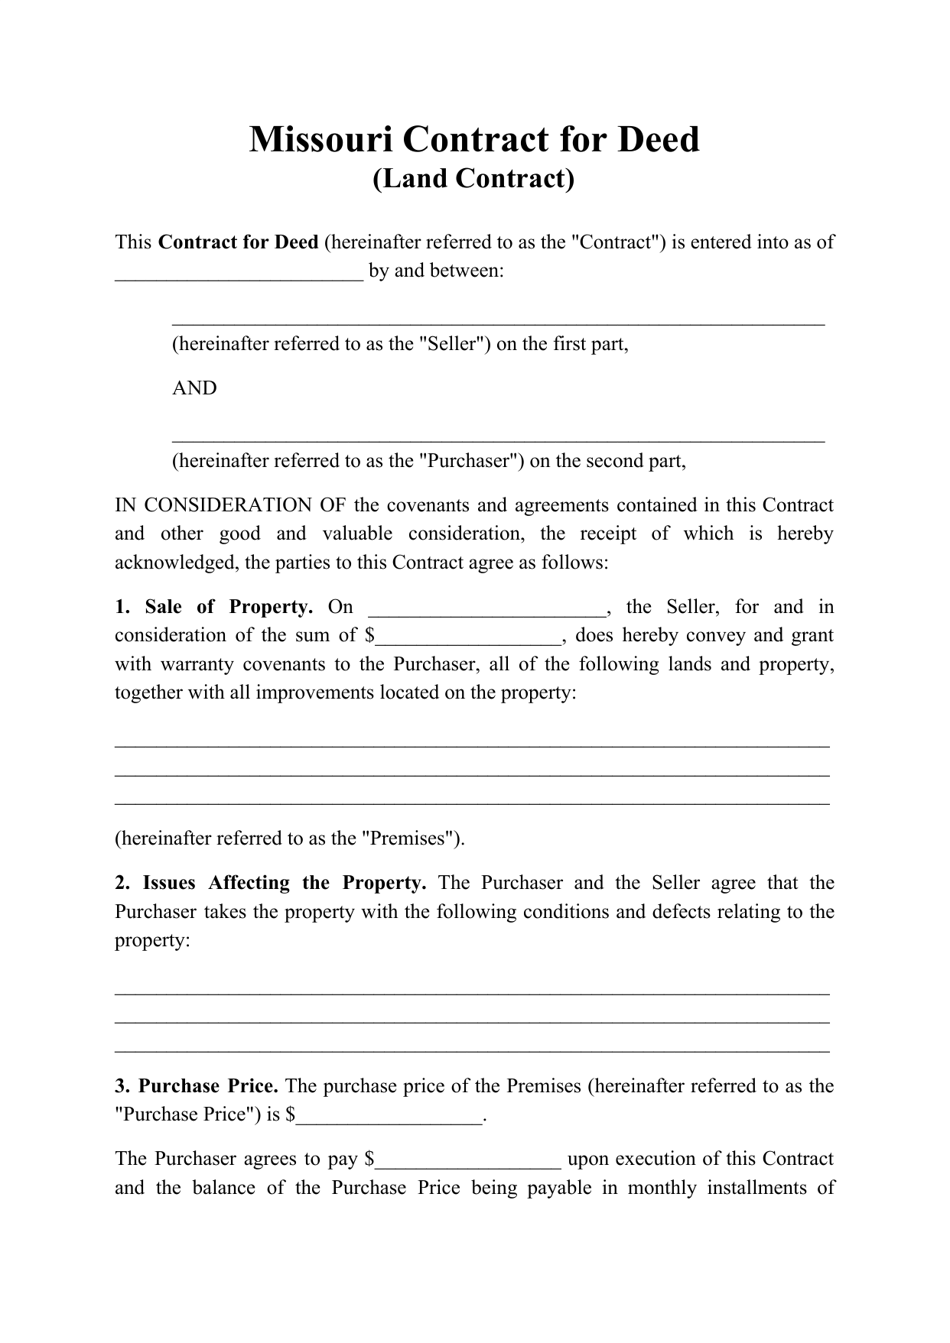 Contract for Deed (Land Contract) - Missouri, Page 1